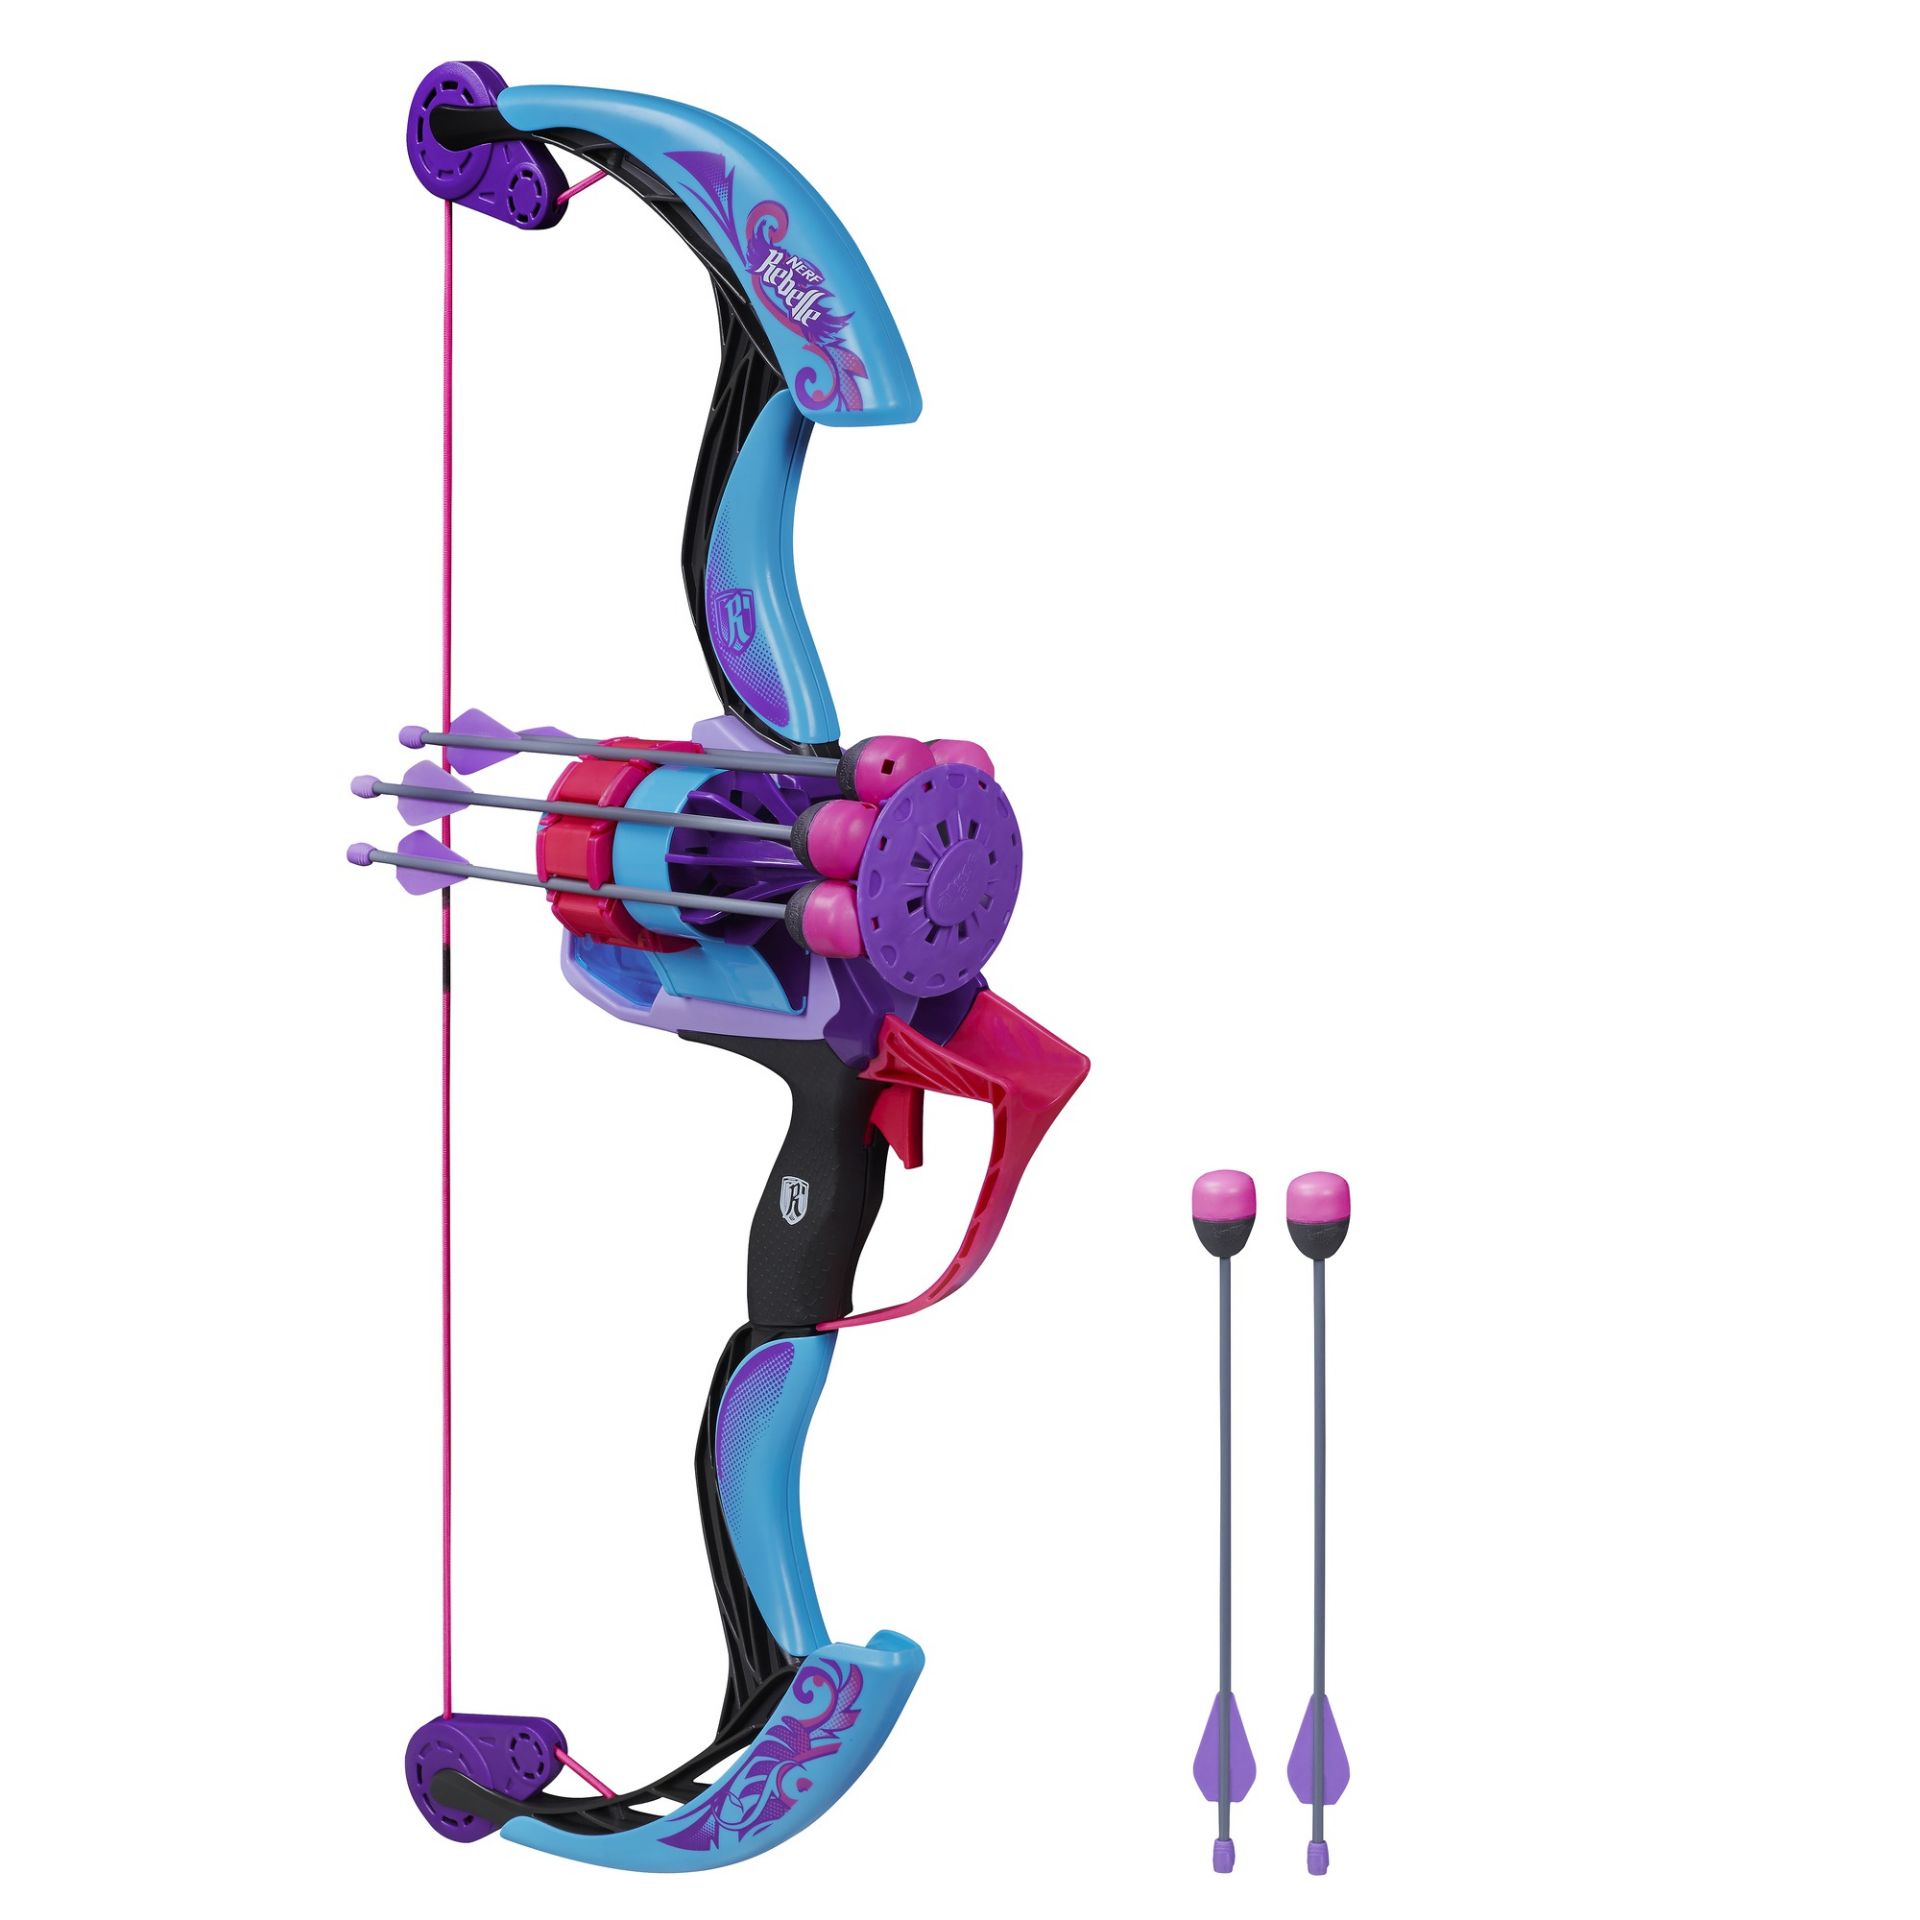 V *TRADE QTY* Brand New Hasbro Nerf Rebelle Arrow Revolution Bow - Fires 6 Whistling Arrows With